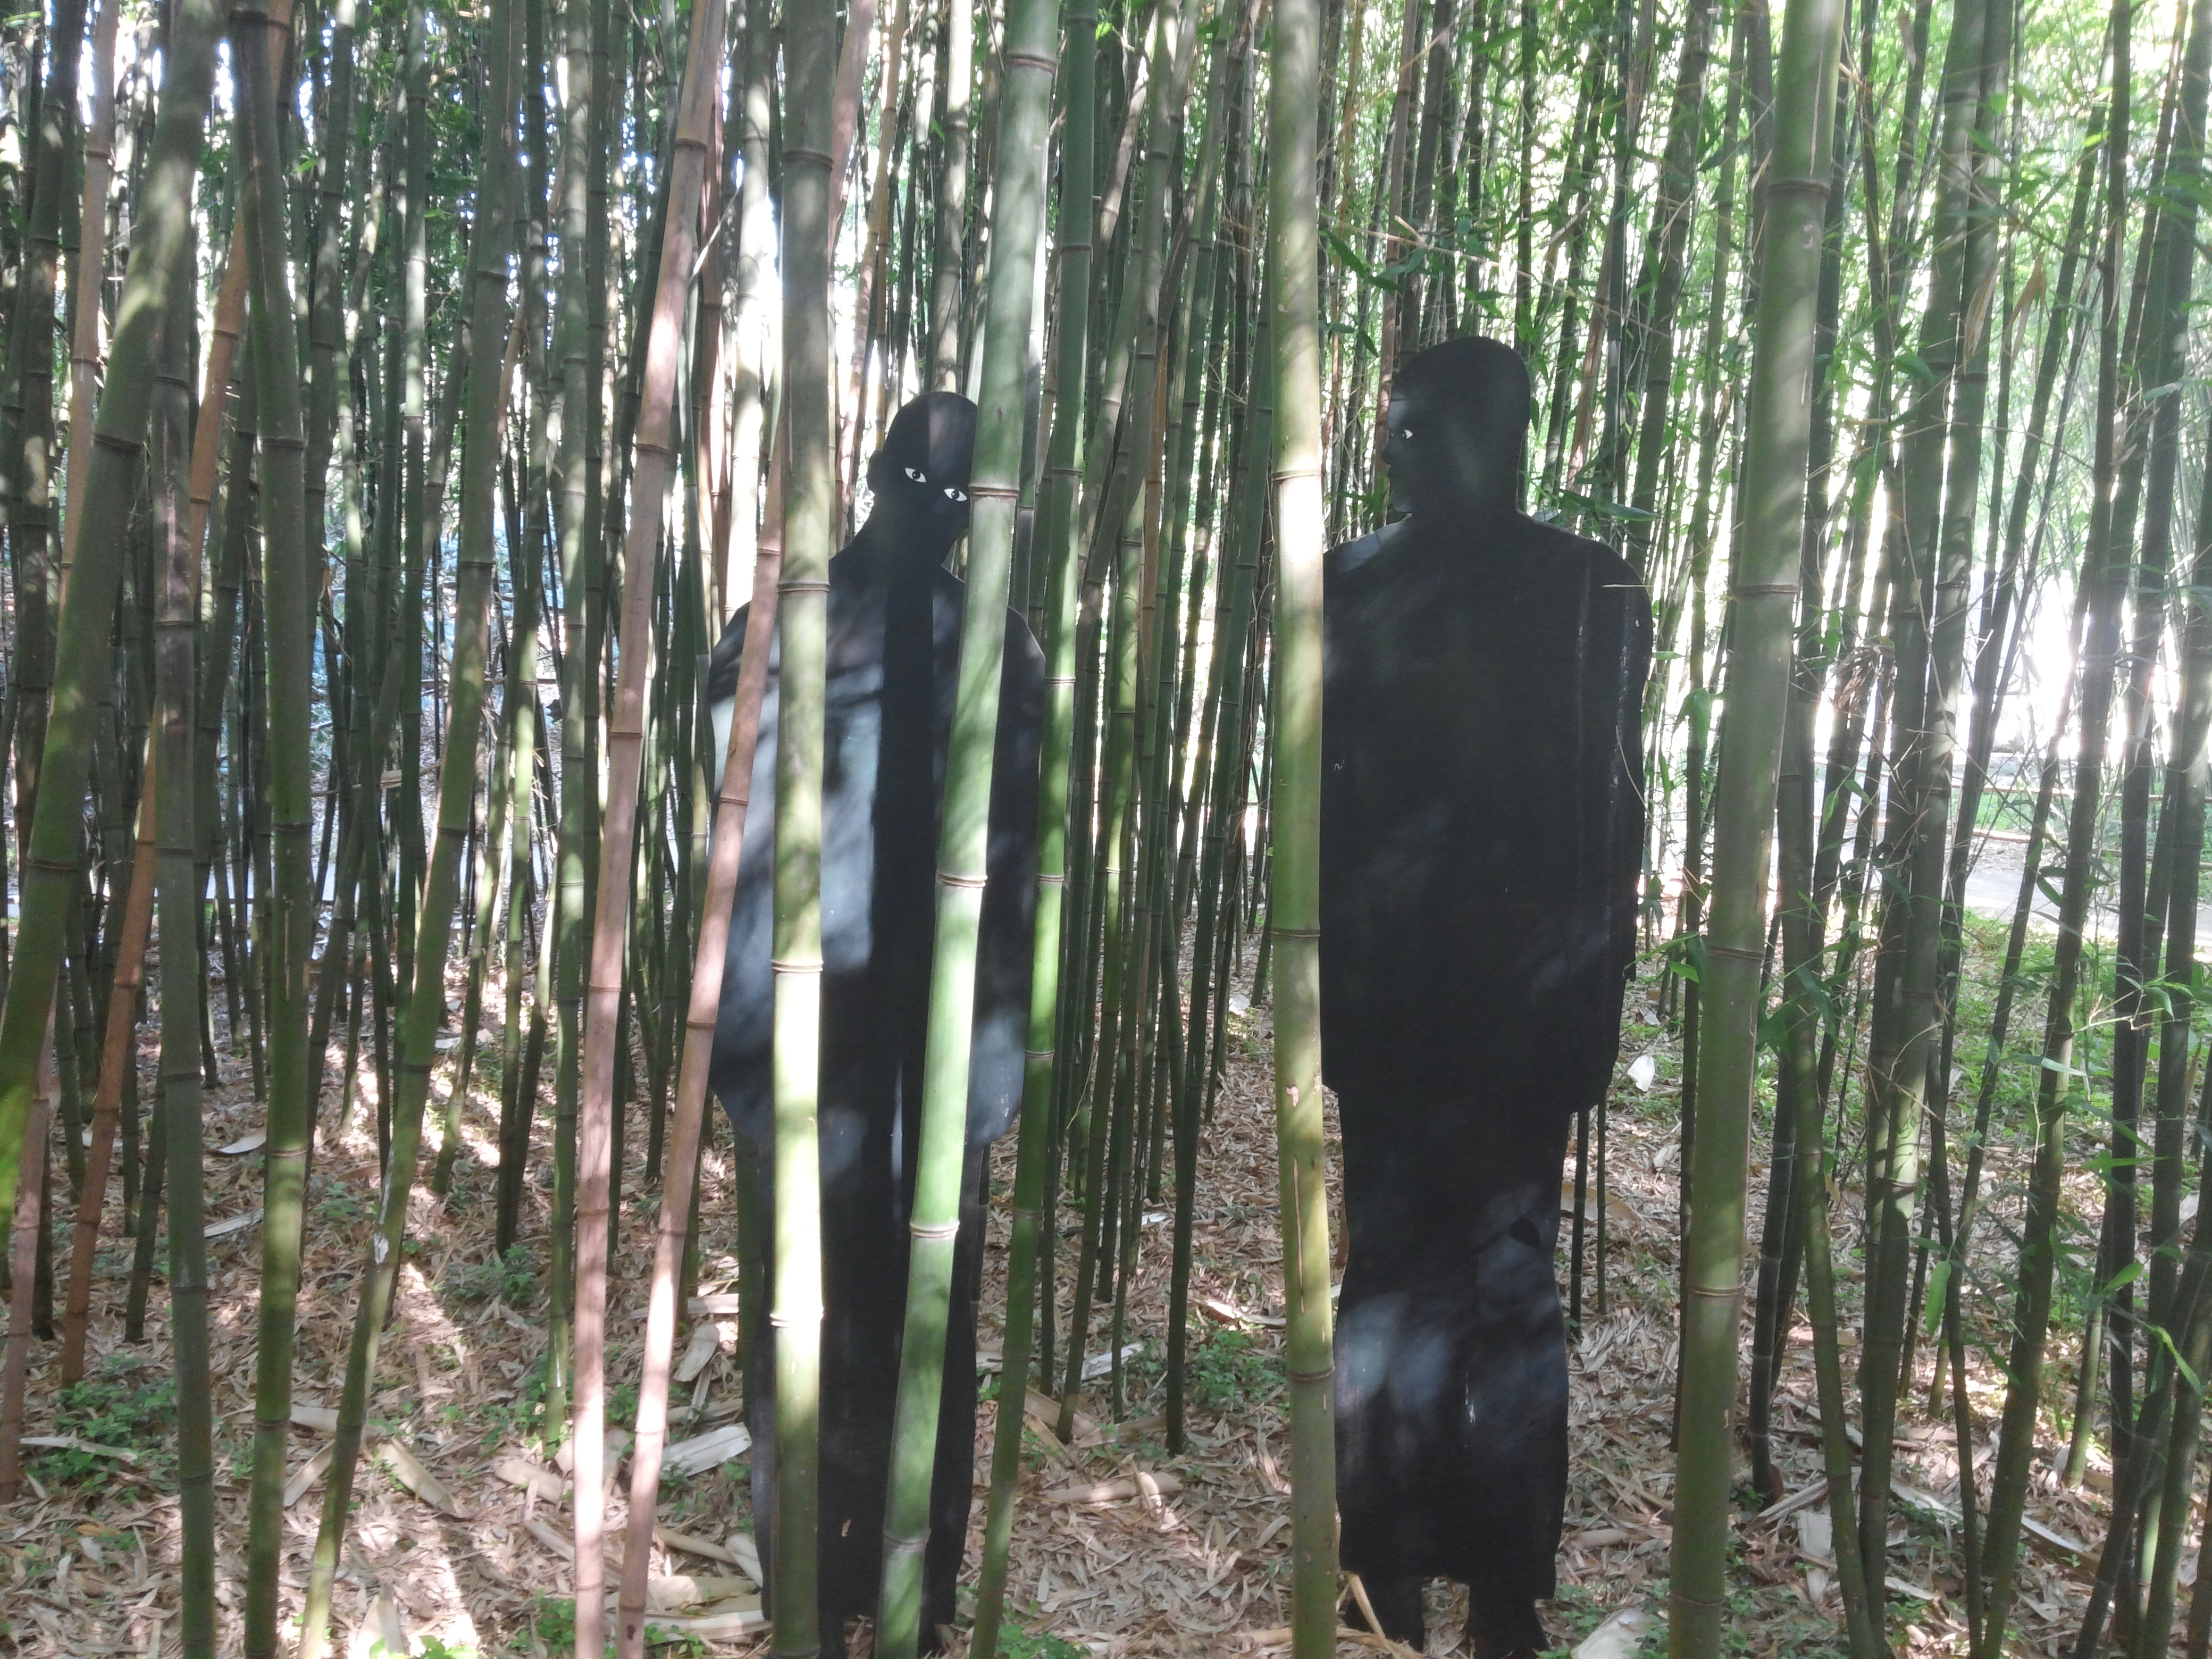 Creepy/Cool statues found in a bamboo forest - Album on Imgur